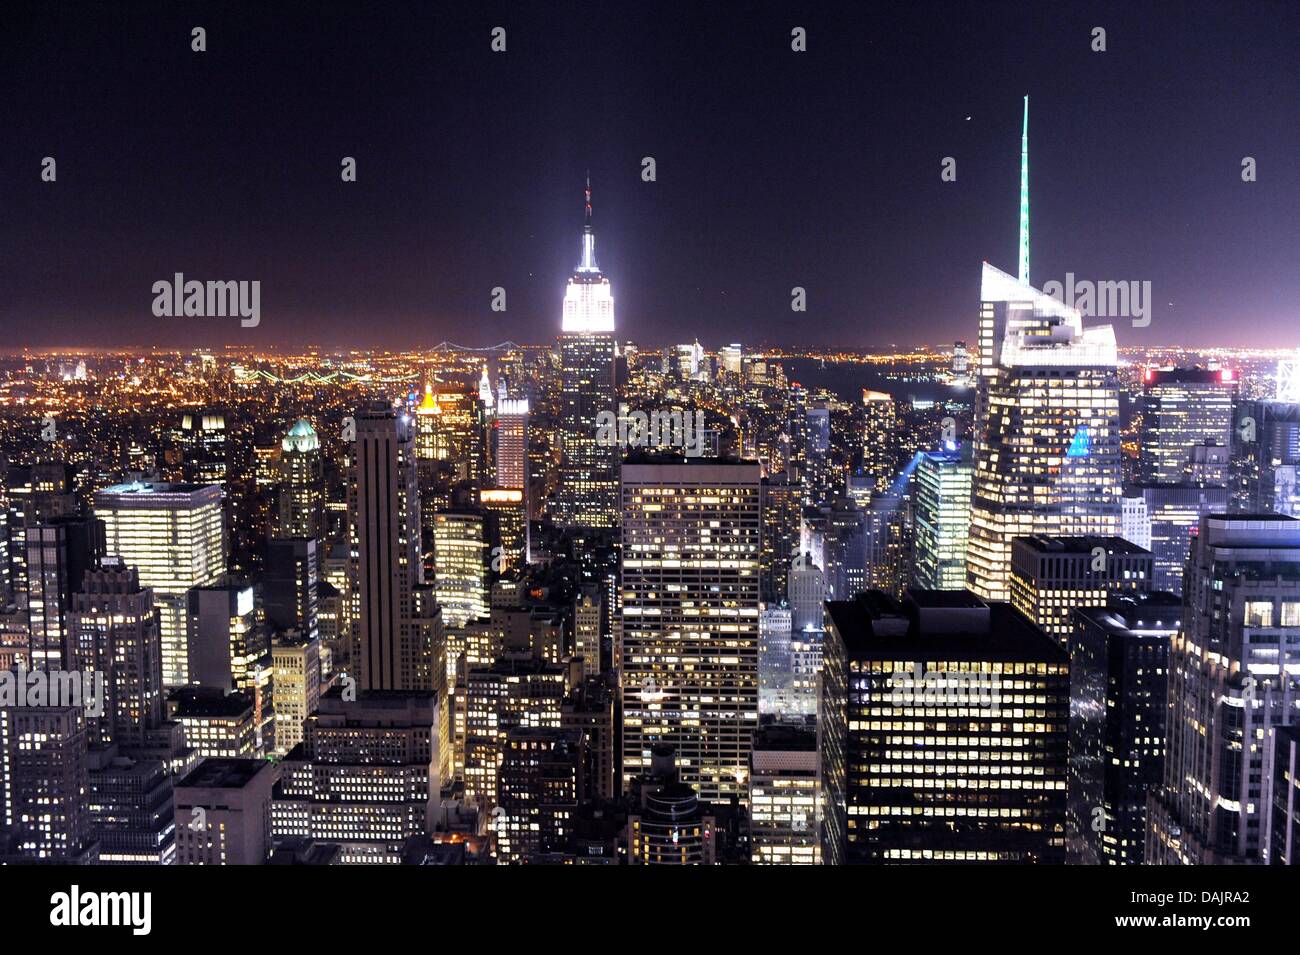 The skyline of New York with the illuminated Empire State Building is visible from the platform of the Rockefeller Center in New York, USA, 26 April 2011. Photo: Maurizio Gambarini Stock Photo